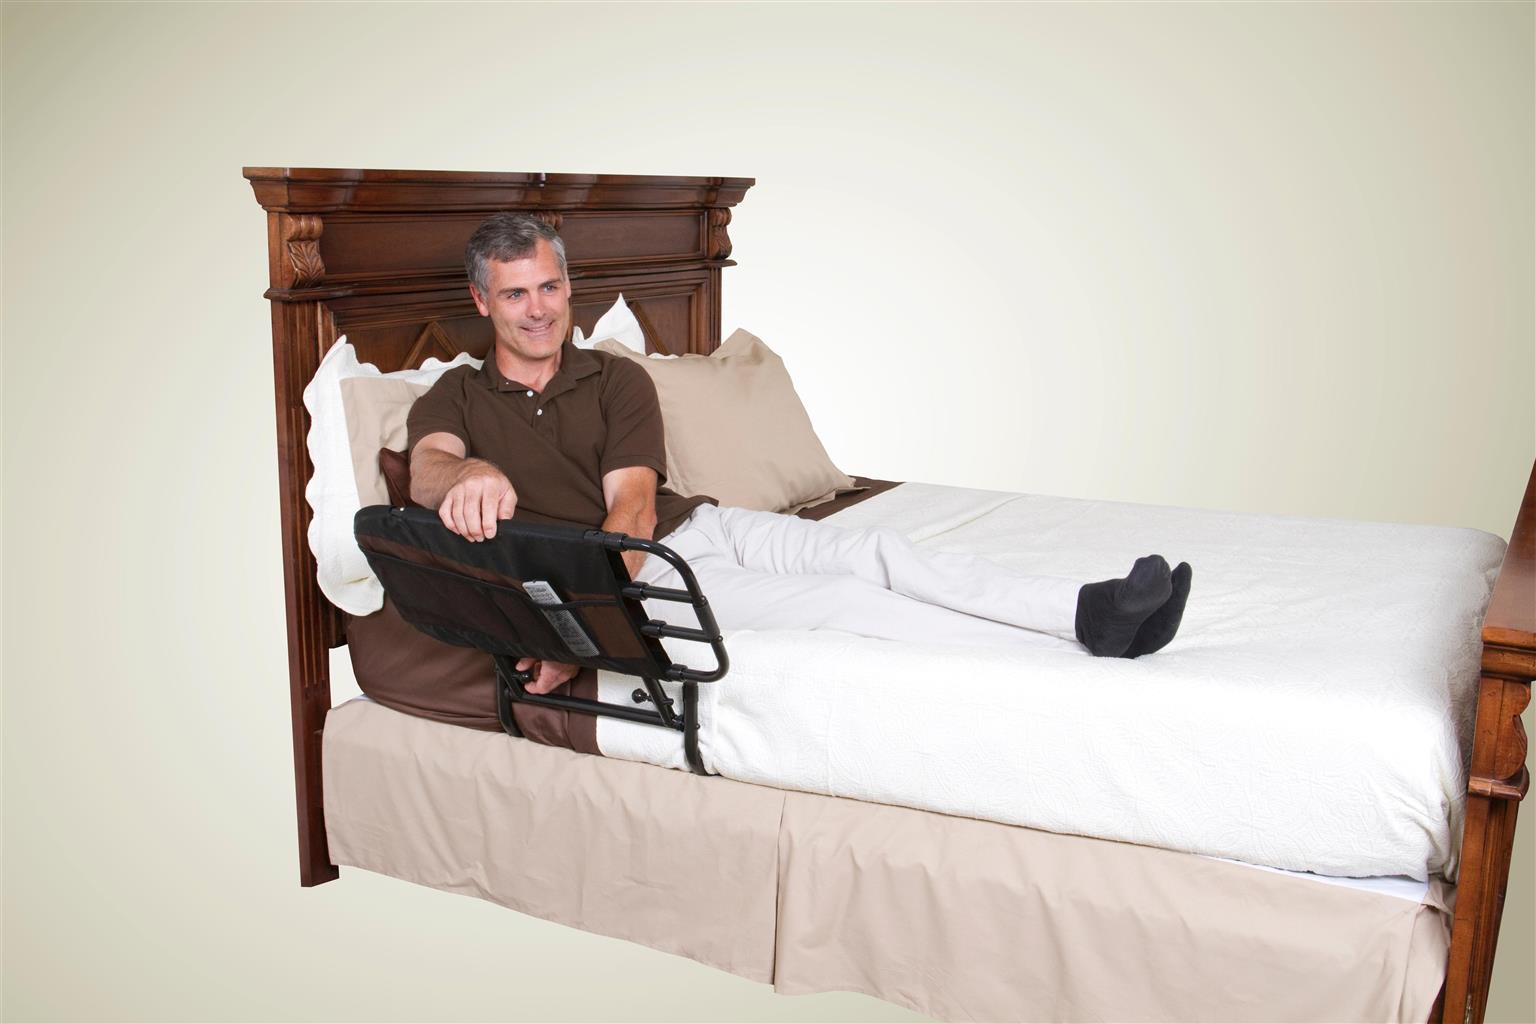 EZ Adjustable Bed Rail or Cot Side - Fits Almost All Standard Beds. FREE DELIVERY, while stocks last